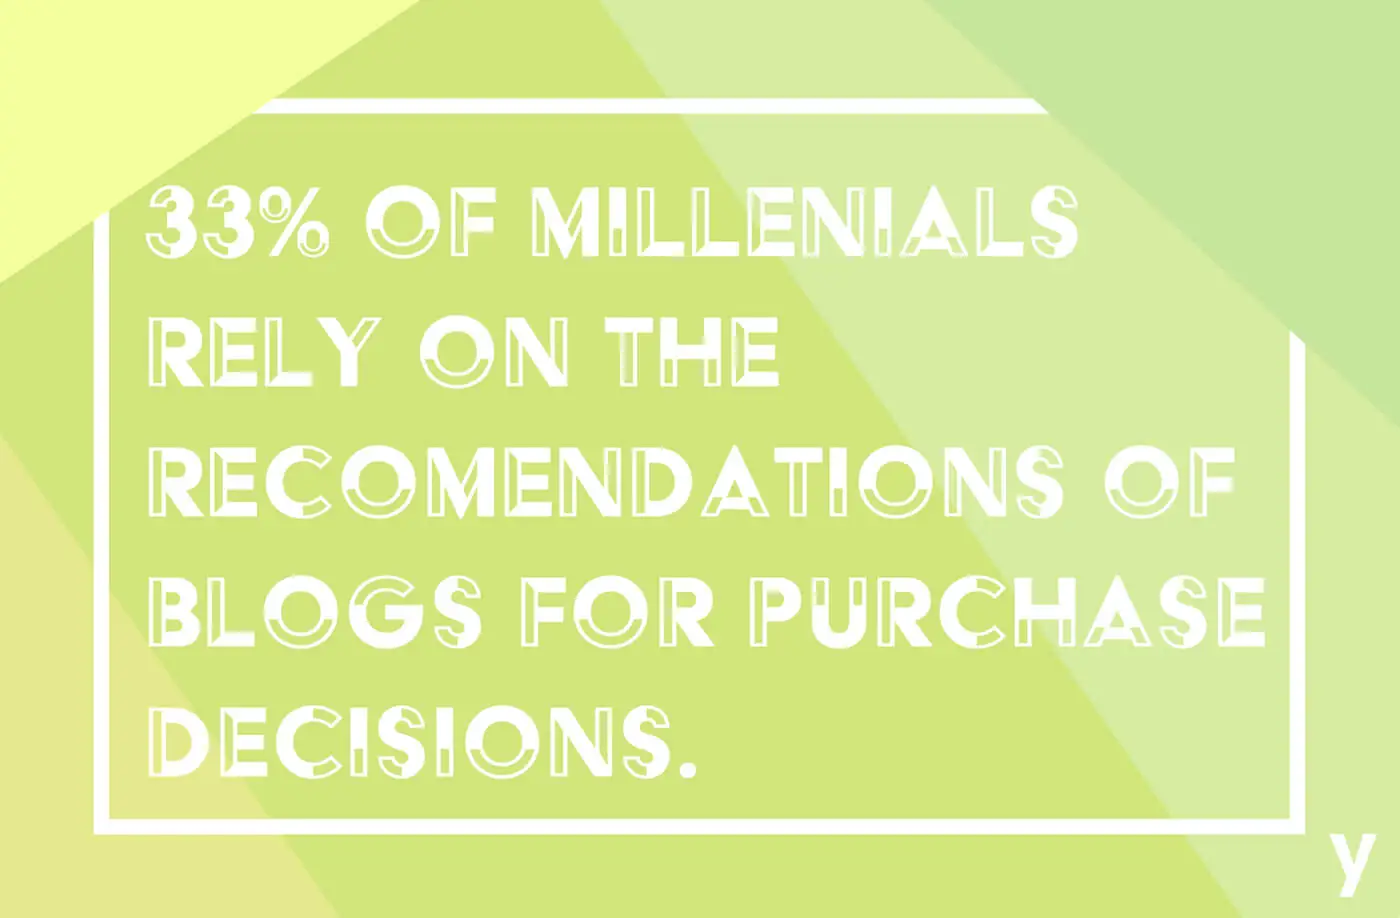 33% of millennials rely on the recommendations of blogs for purchase decisions.